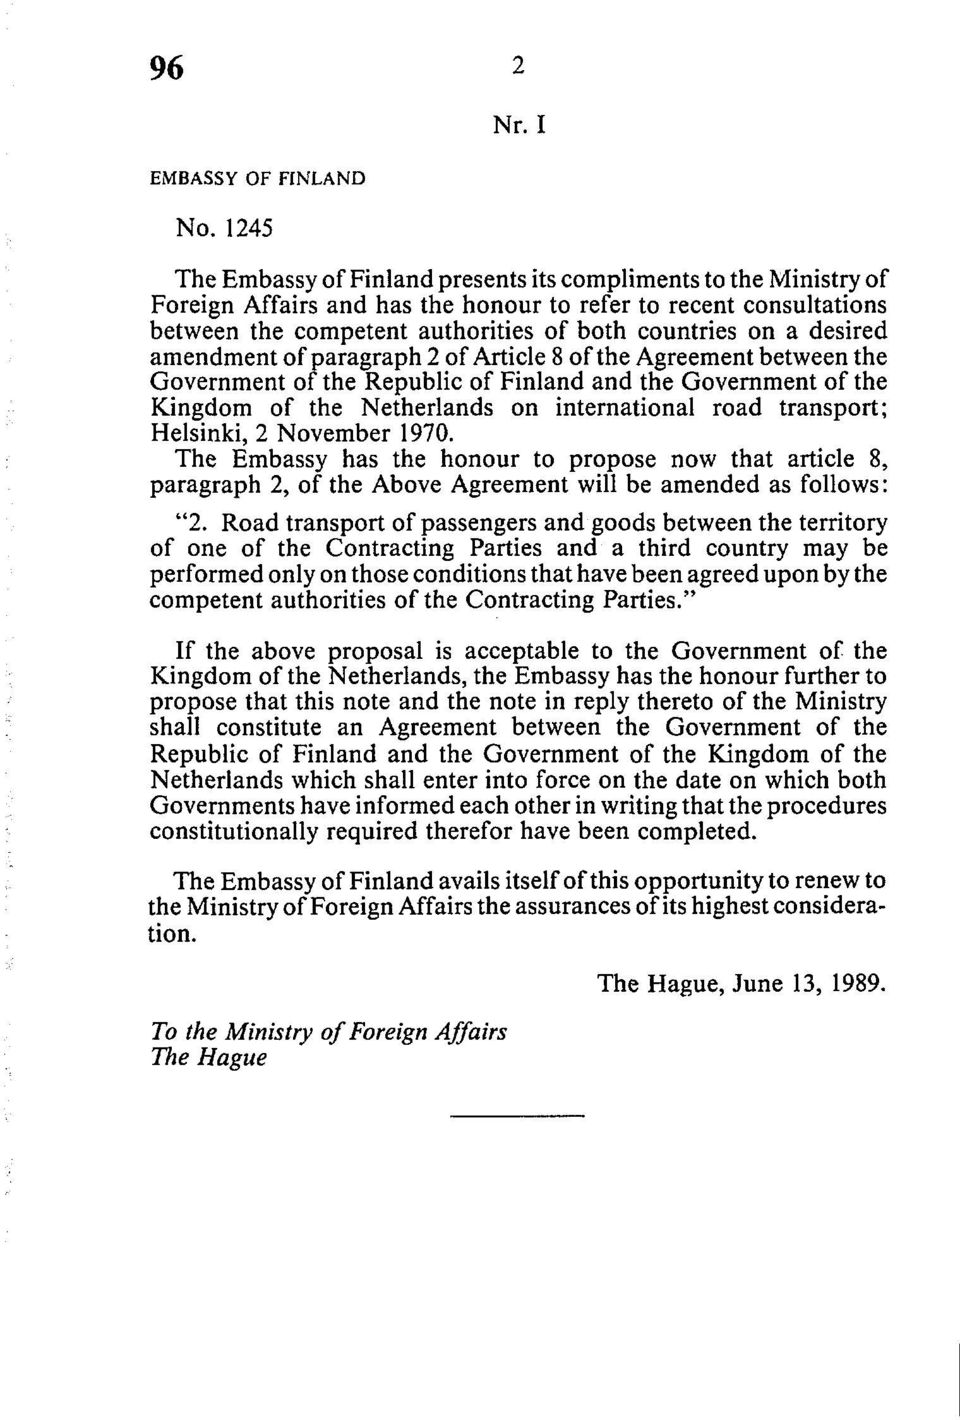 desired amendment of paragraph 2 of Article 8 of the Agreement between the Government of the Republic of Finland and the Government of the Kingdom of the Netherlands on international road transport;